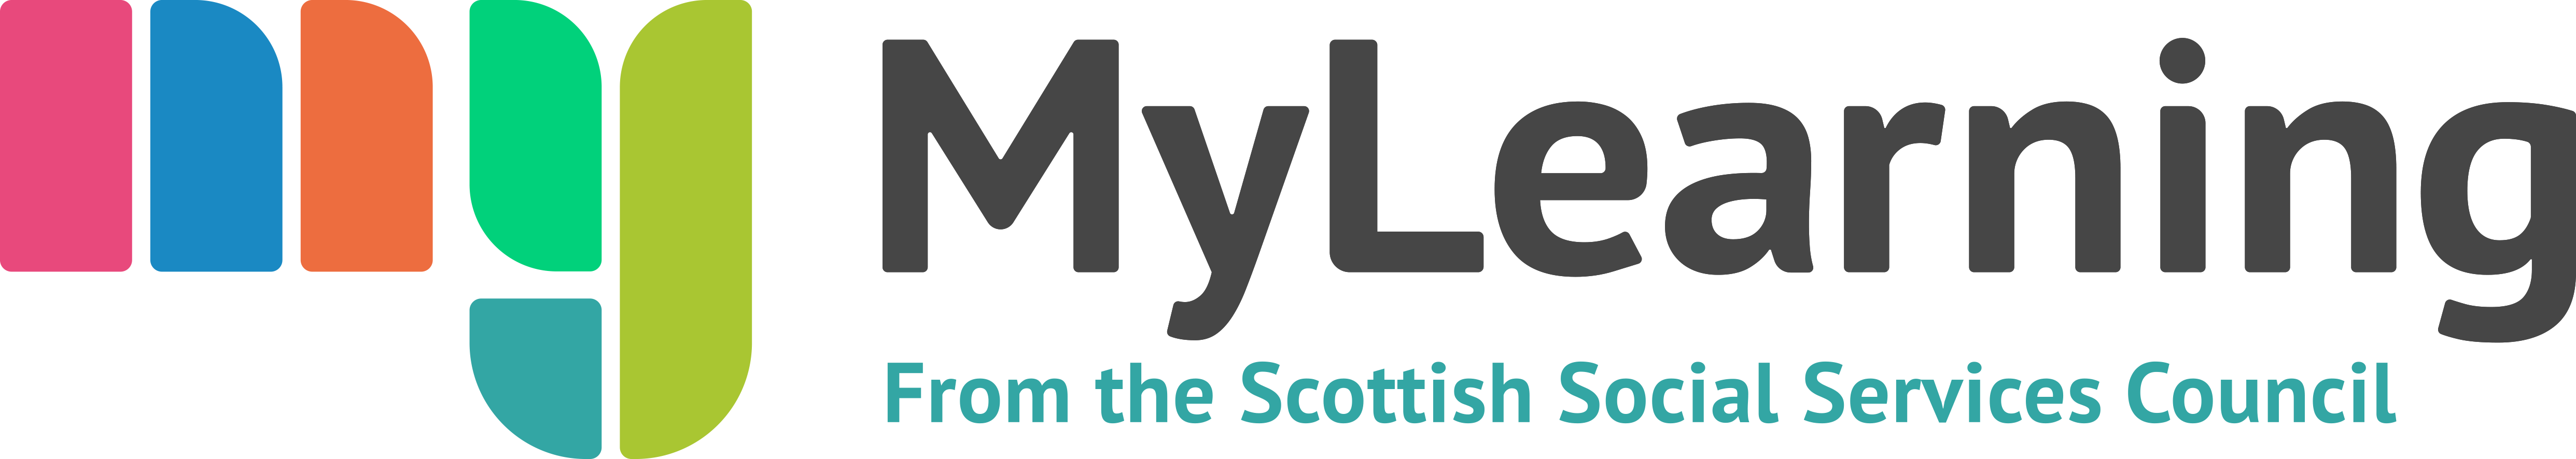 MyLearning from the Scottish Social Services Council logo